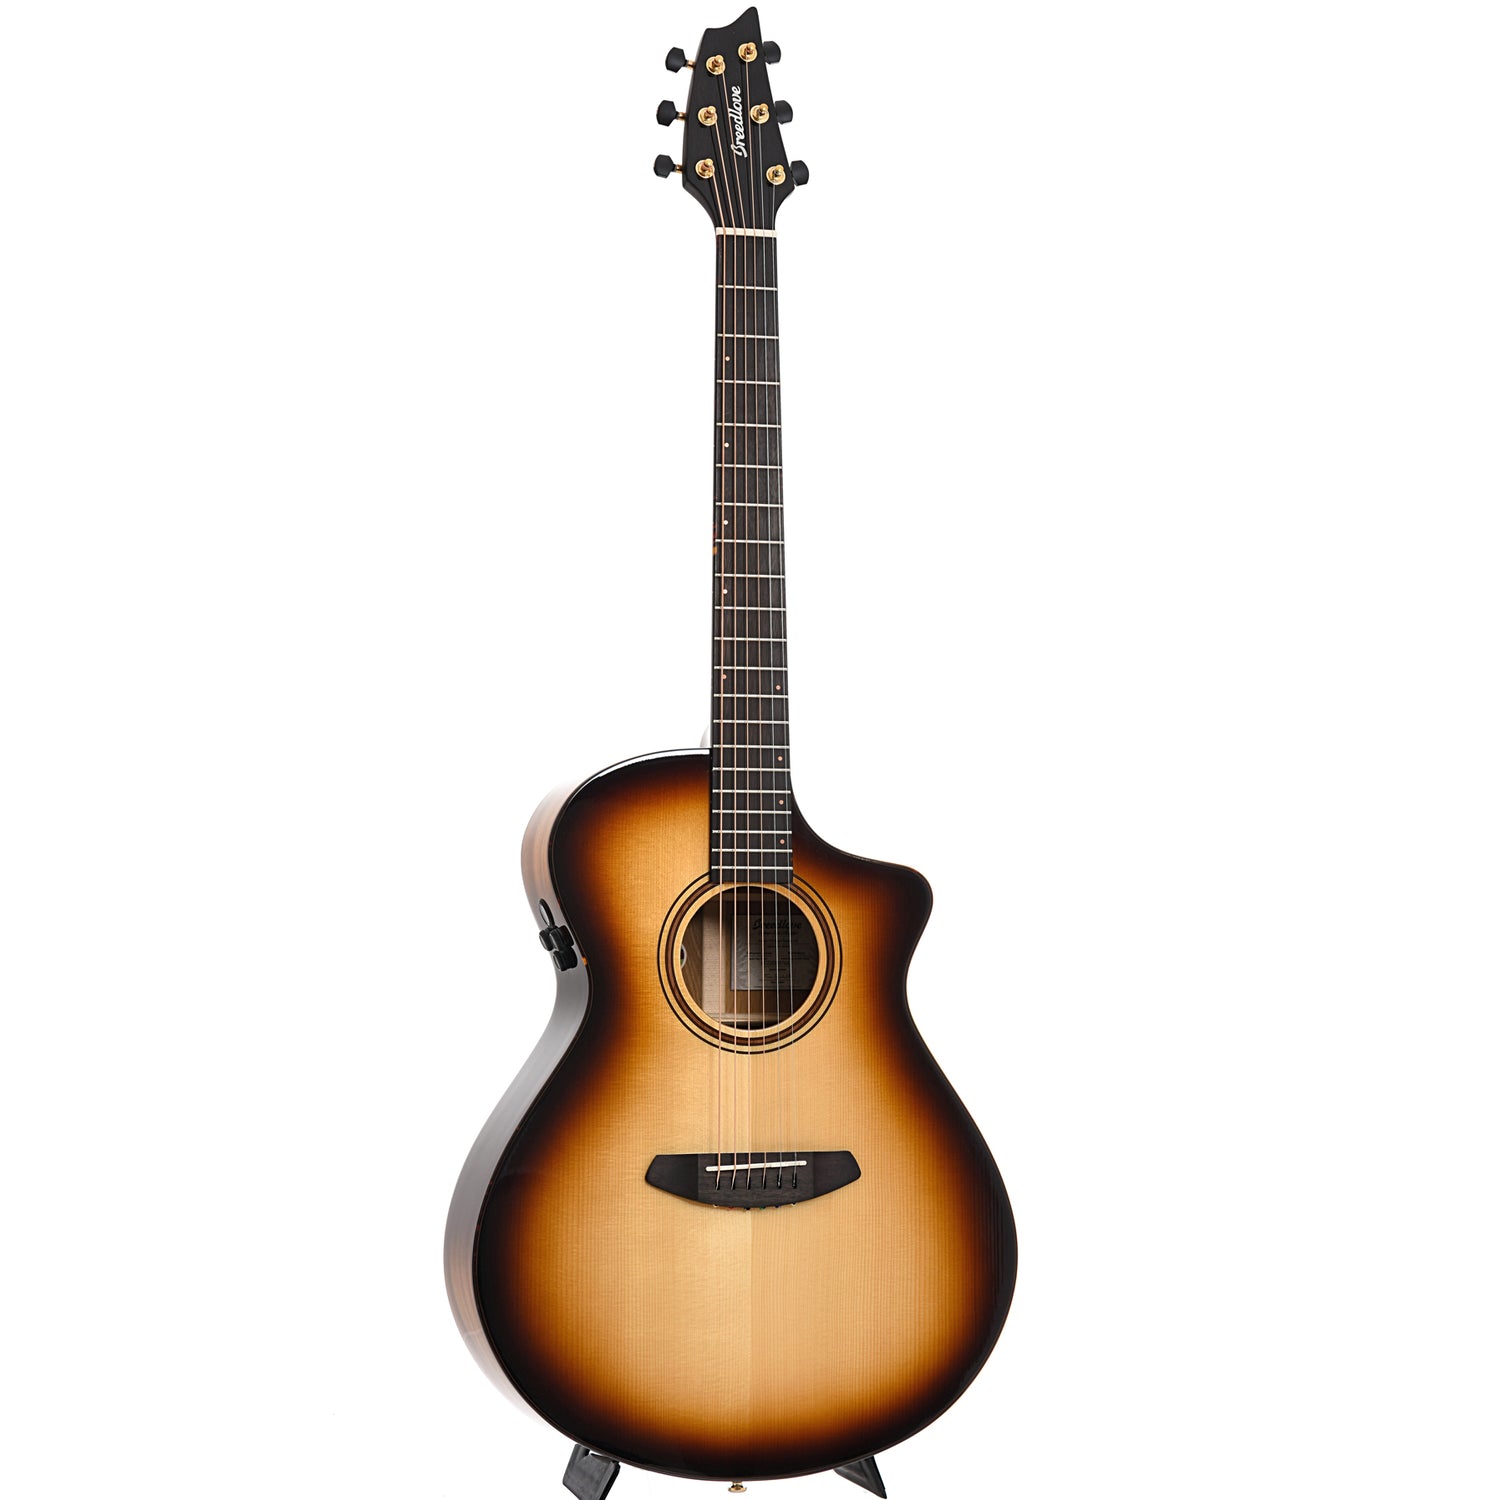 Full front and side of Breedlove Organic Artista Pro Concert Burnt Amber CE European